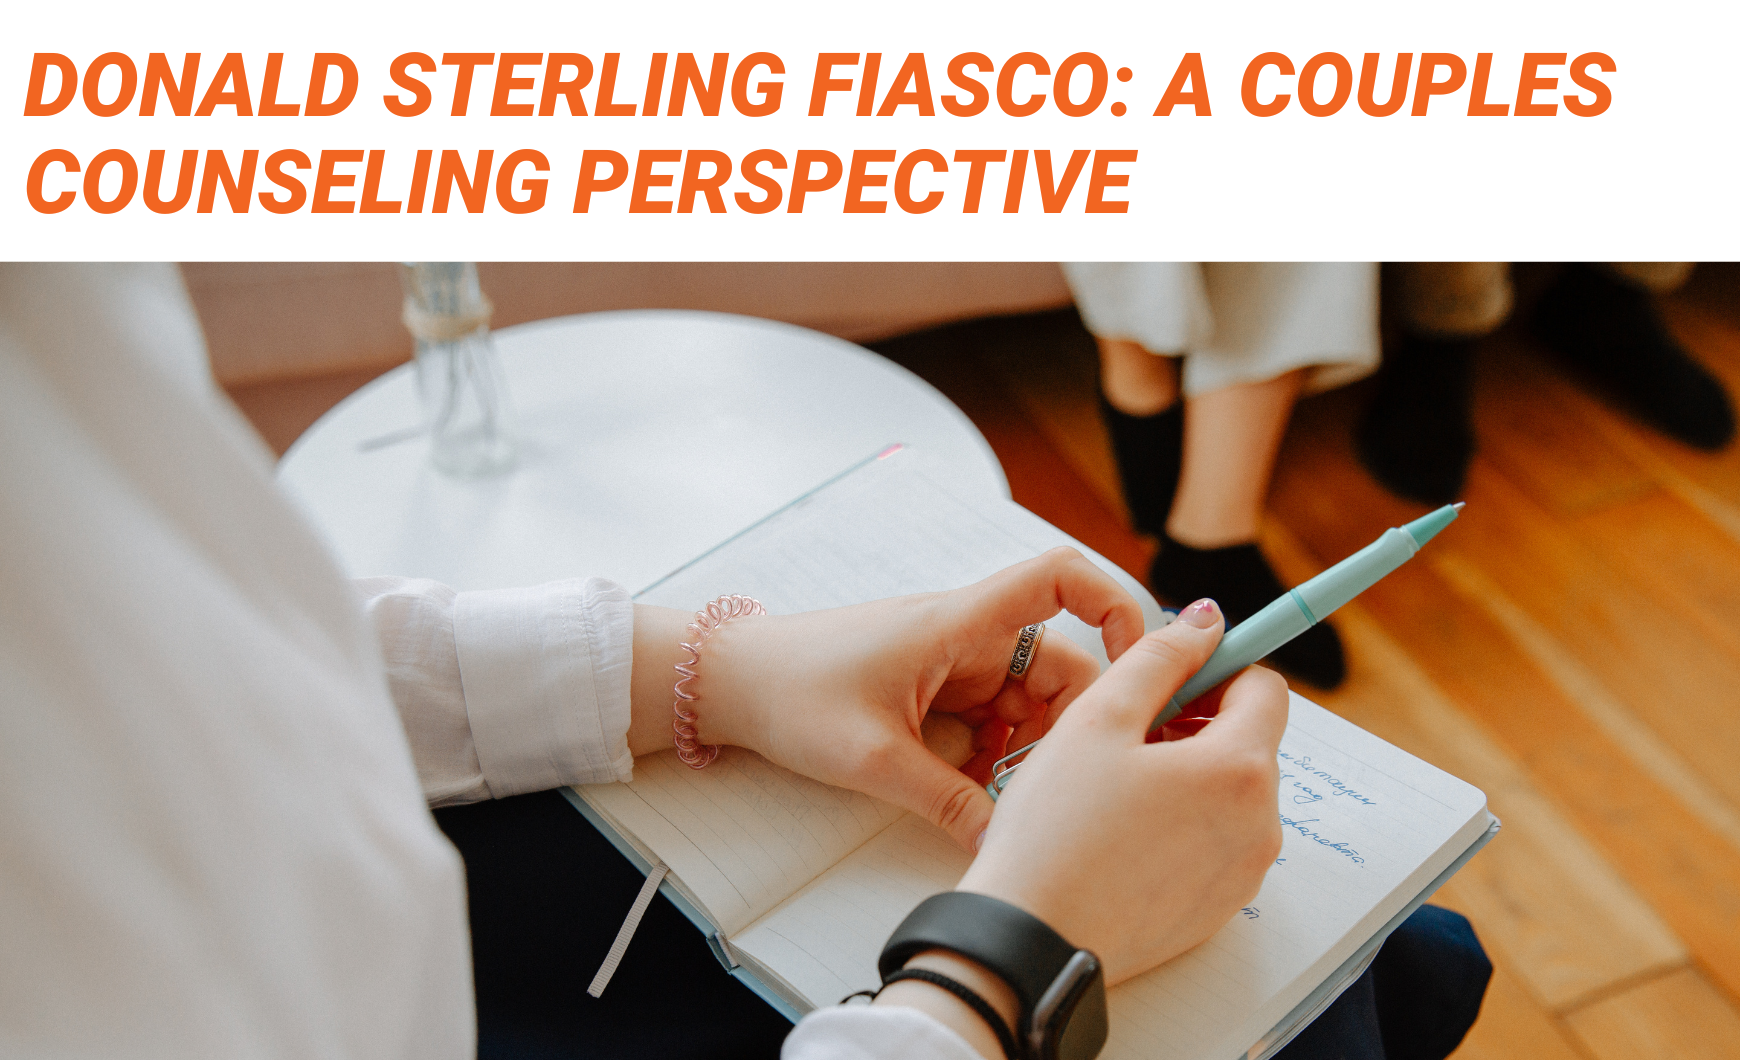 Orange text on a white background that reads "Donald Sterling Fiasco: a Couples Counseling Perspective" above a photo which shows a close up pair of white hands on an open notebook. The hands appear to belong to a therapist who has their notebook on their lap. in the top right of the photo, you can see two pairs of feet and a couch out of focus, which appears to be the couple in counseling.